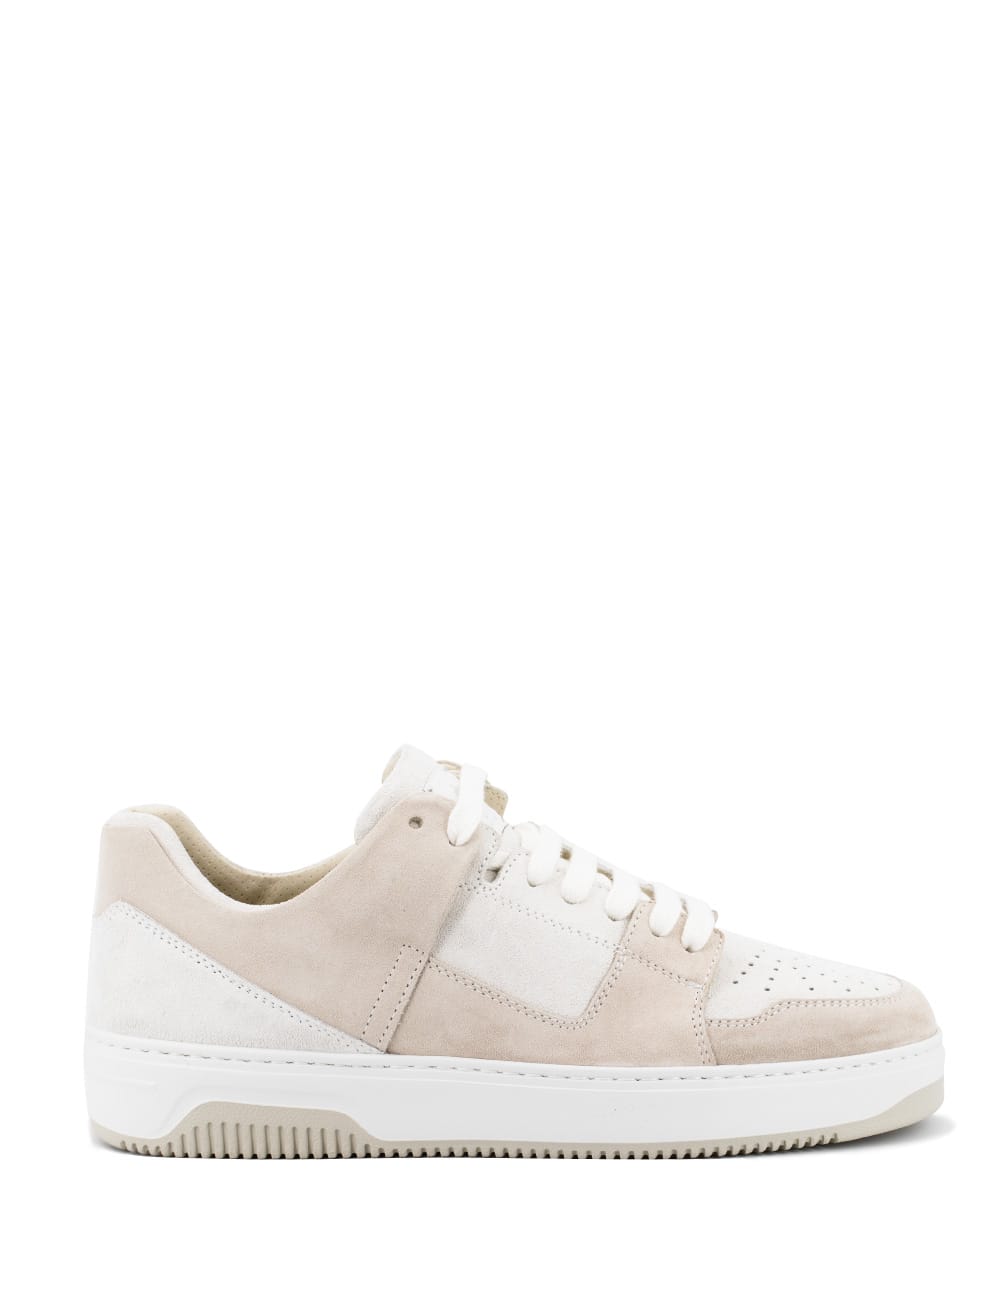 Eleventy Sneakers In Sand And White